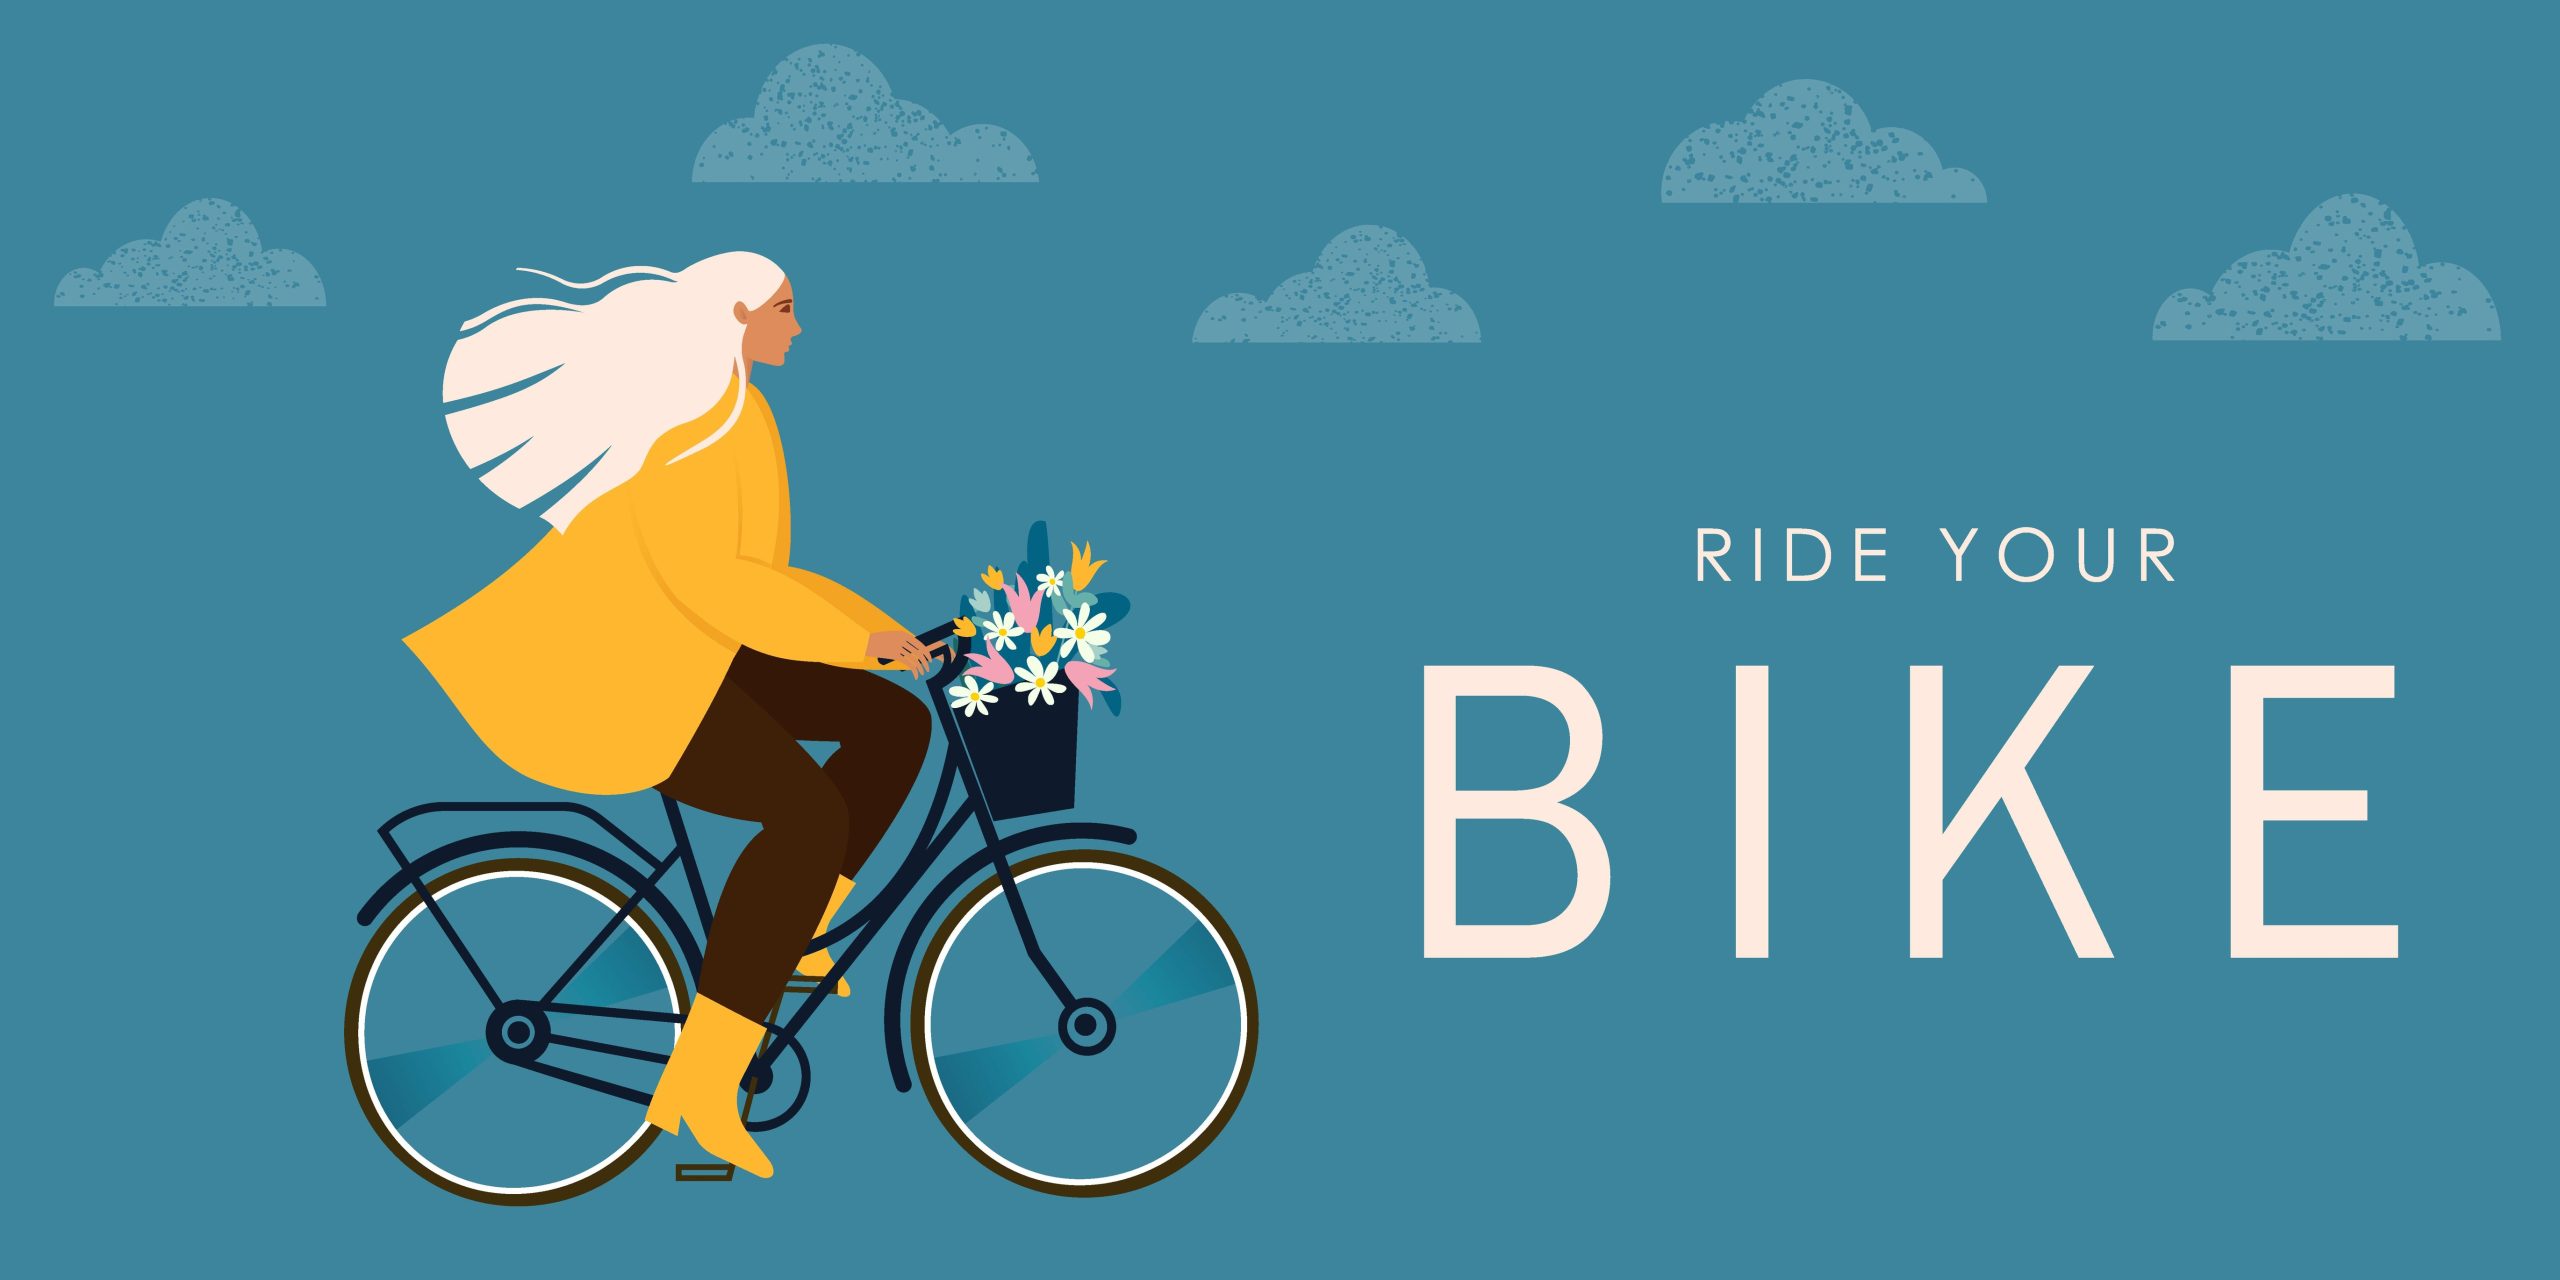 An illustration of a woman on a bike. There is a handlebar basket full of flowers. It says "Ride your bike"